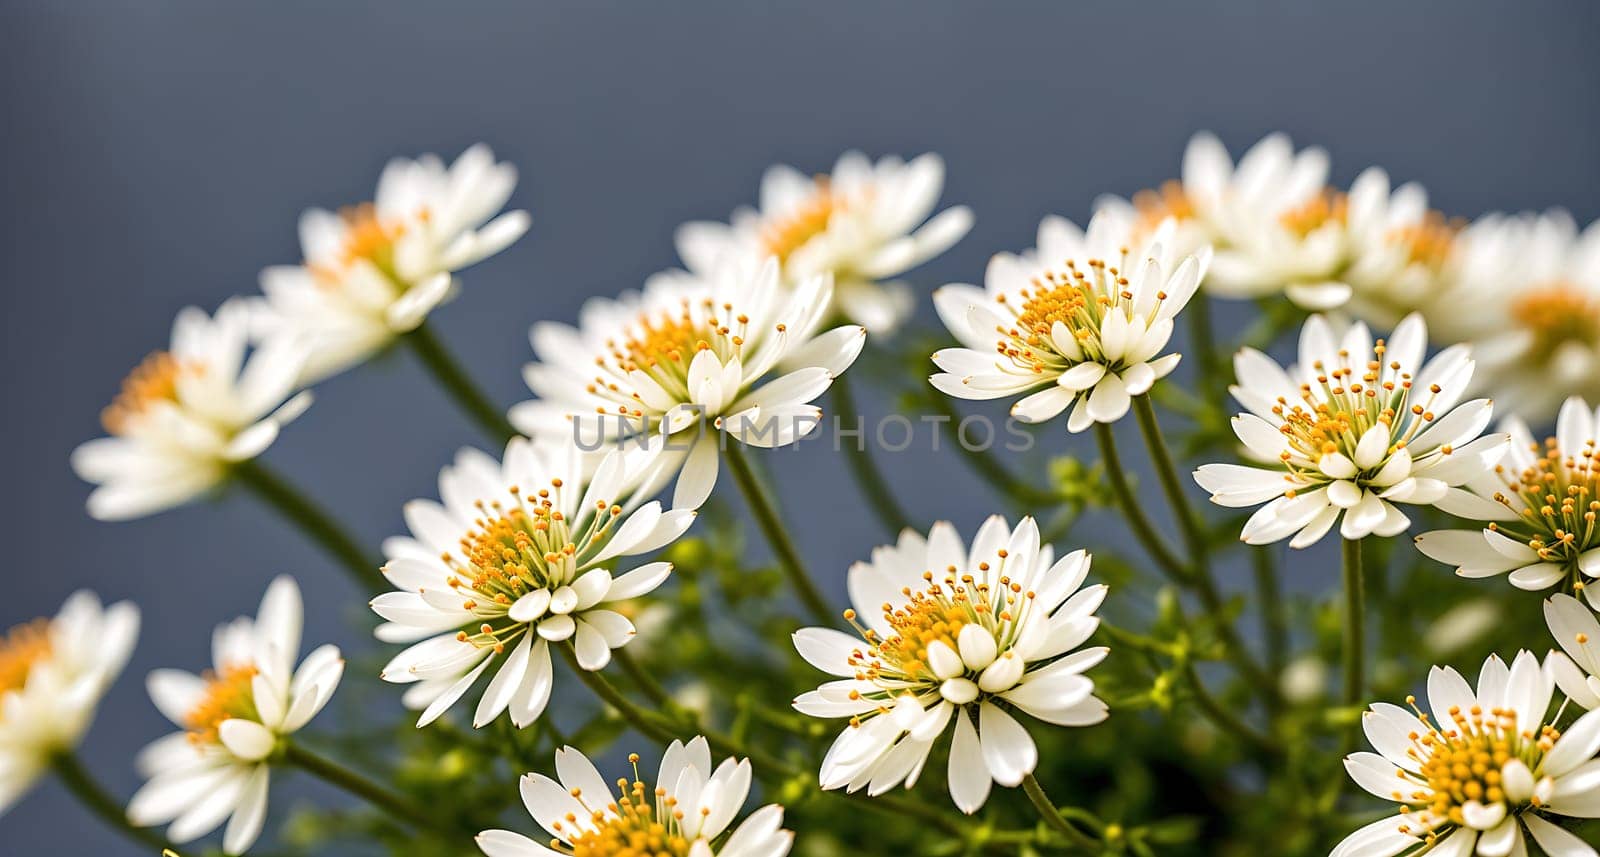 The image shows a bouquet of white flowers with yellow centers.